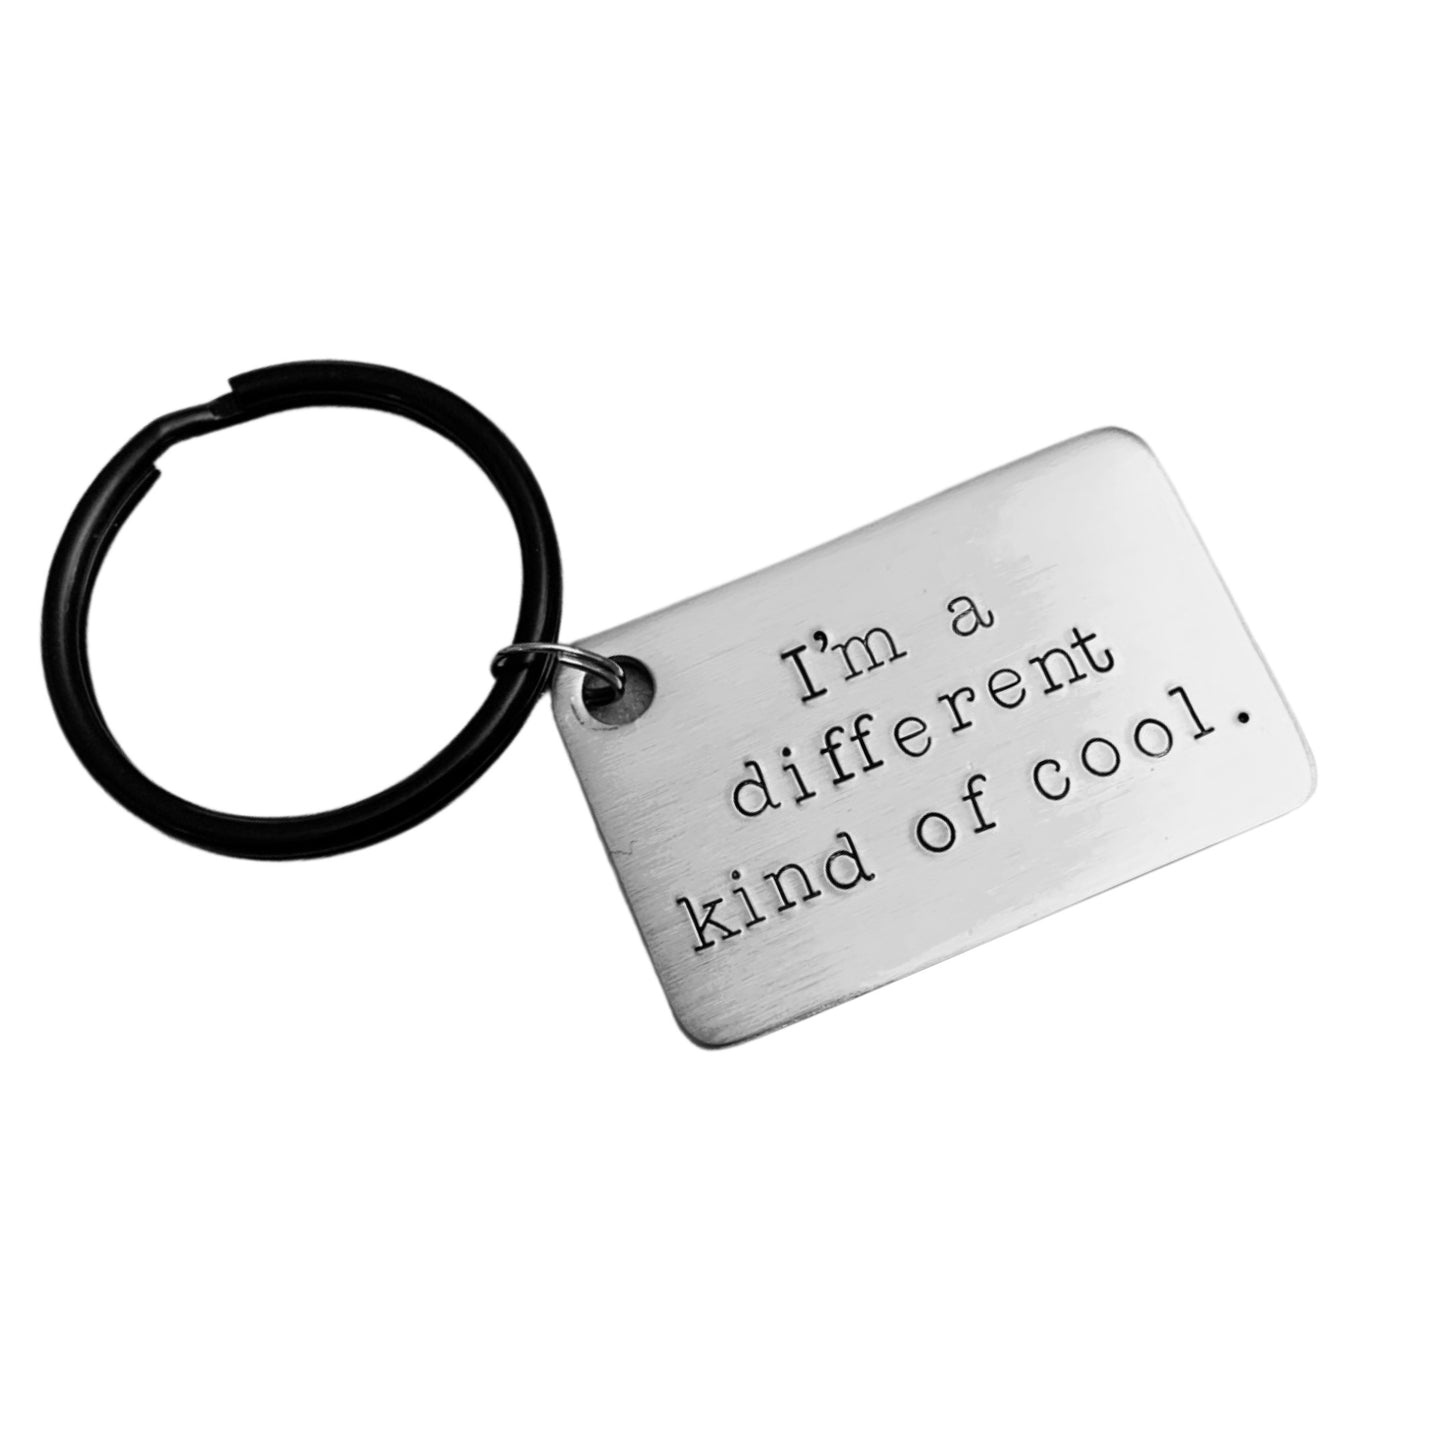 I'm a different kind of cool | Key Chain